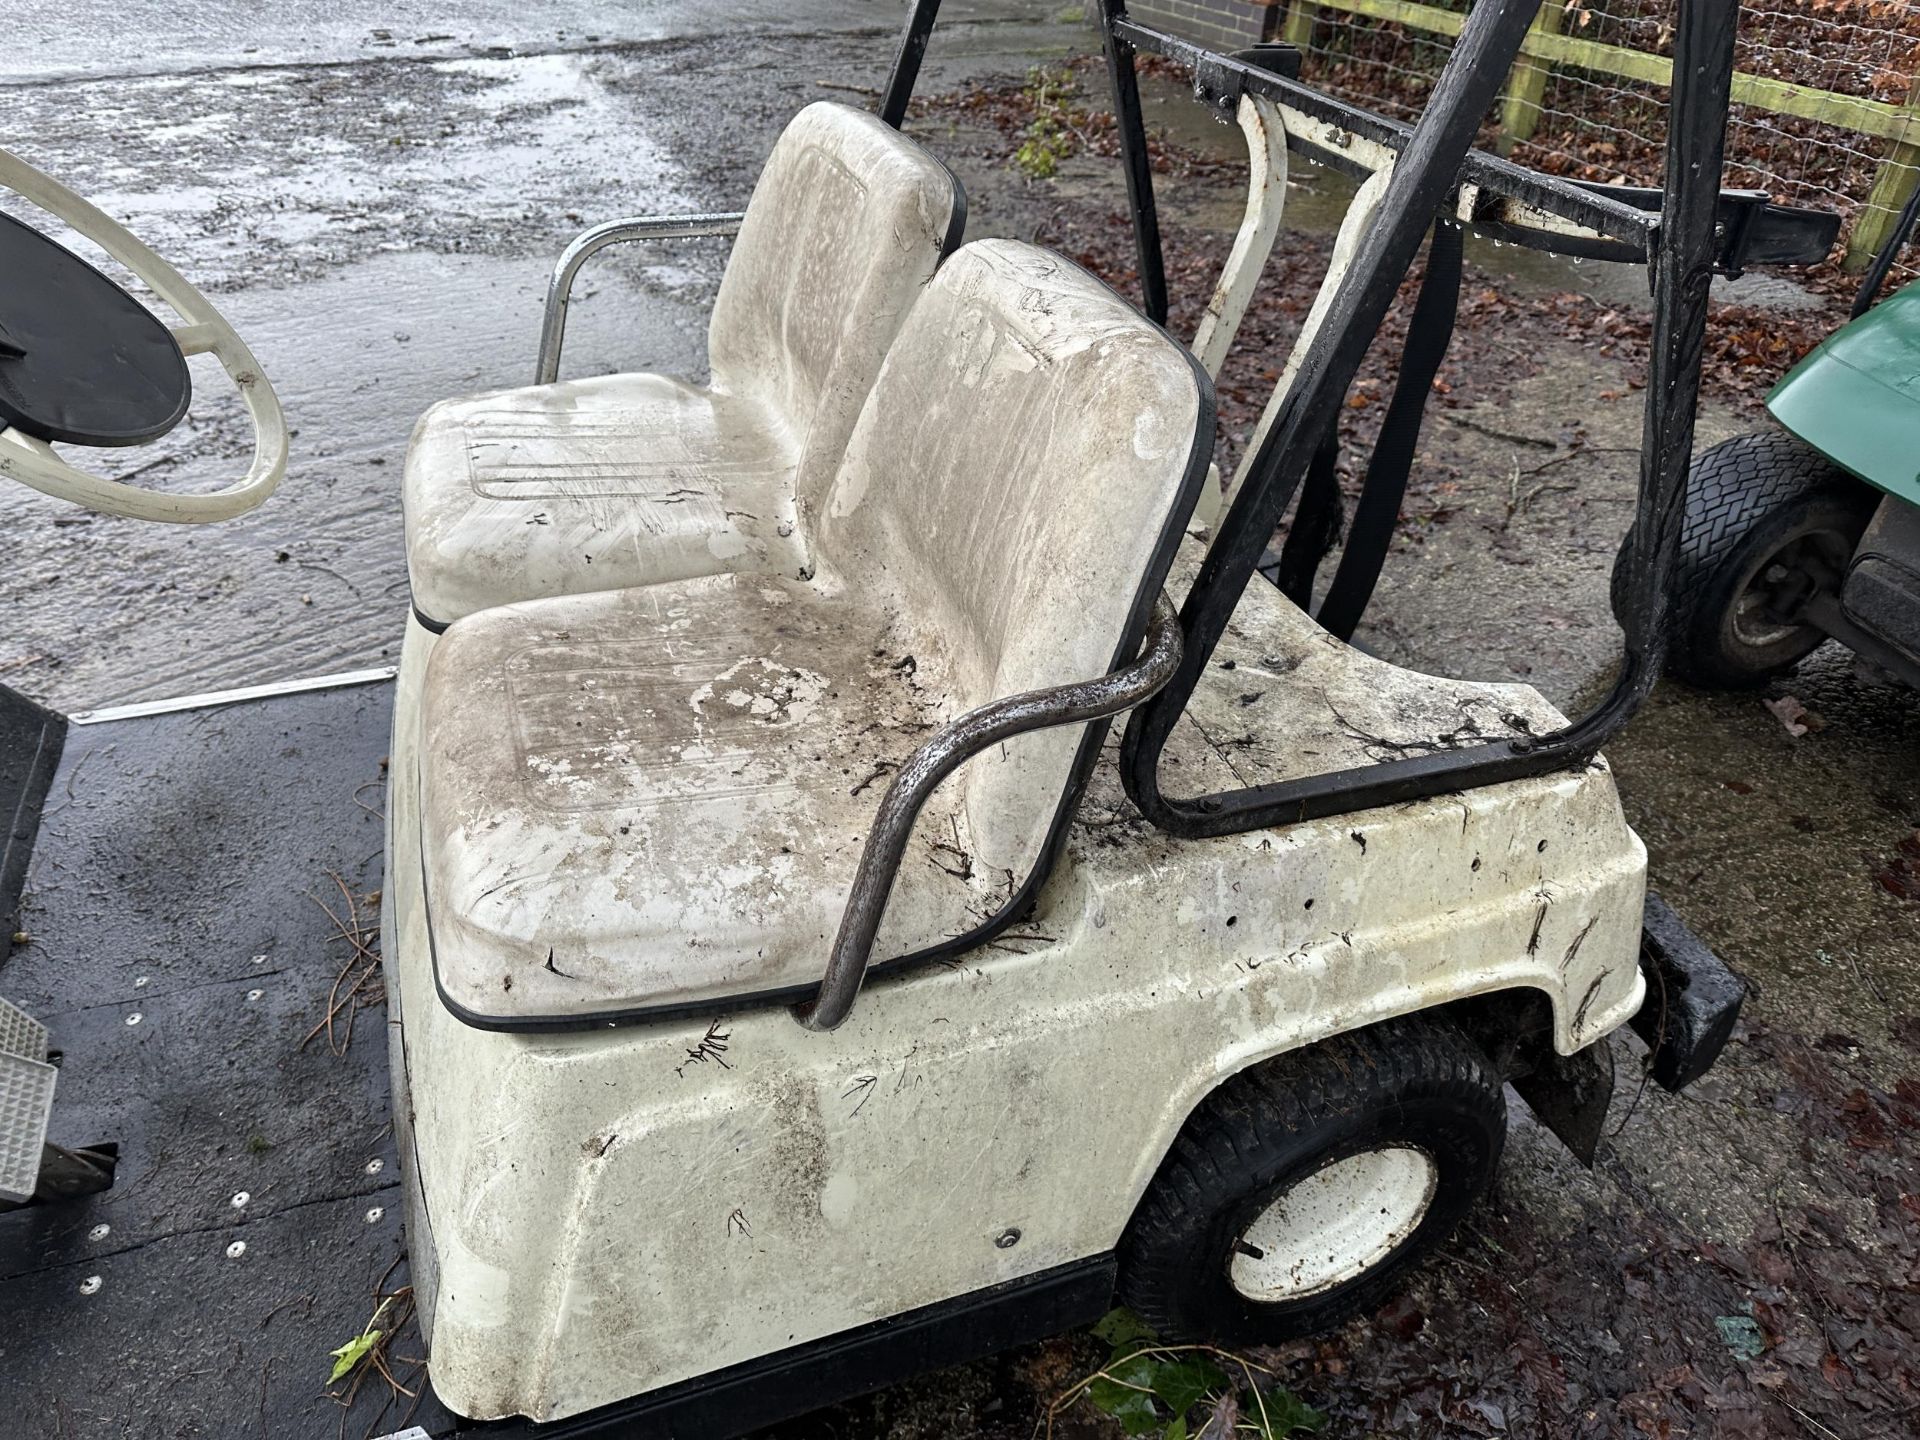 A WHITE YAMAHA ELECTRIC GOLF BUGGY COMPLETE WITH KEY - Image 4 of 6